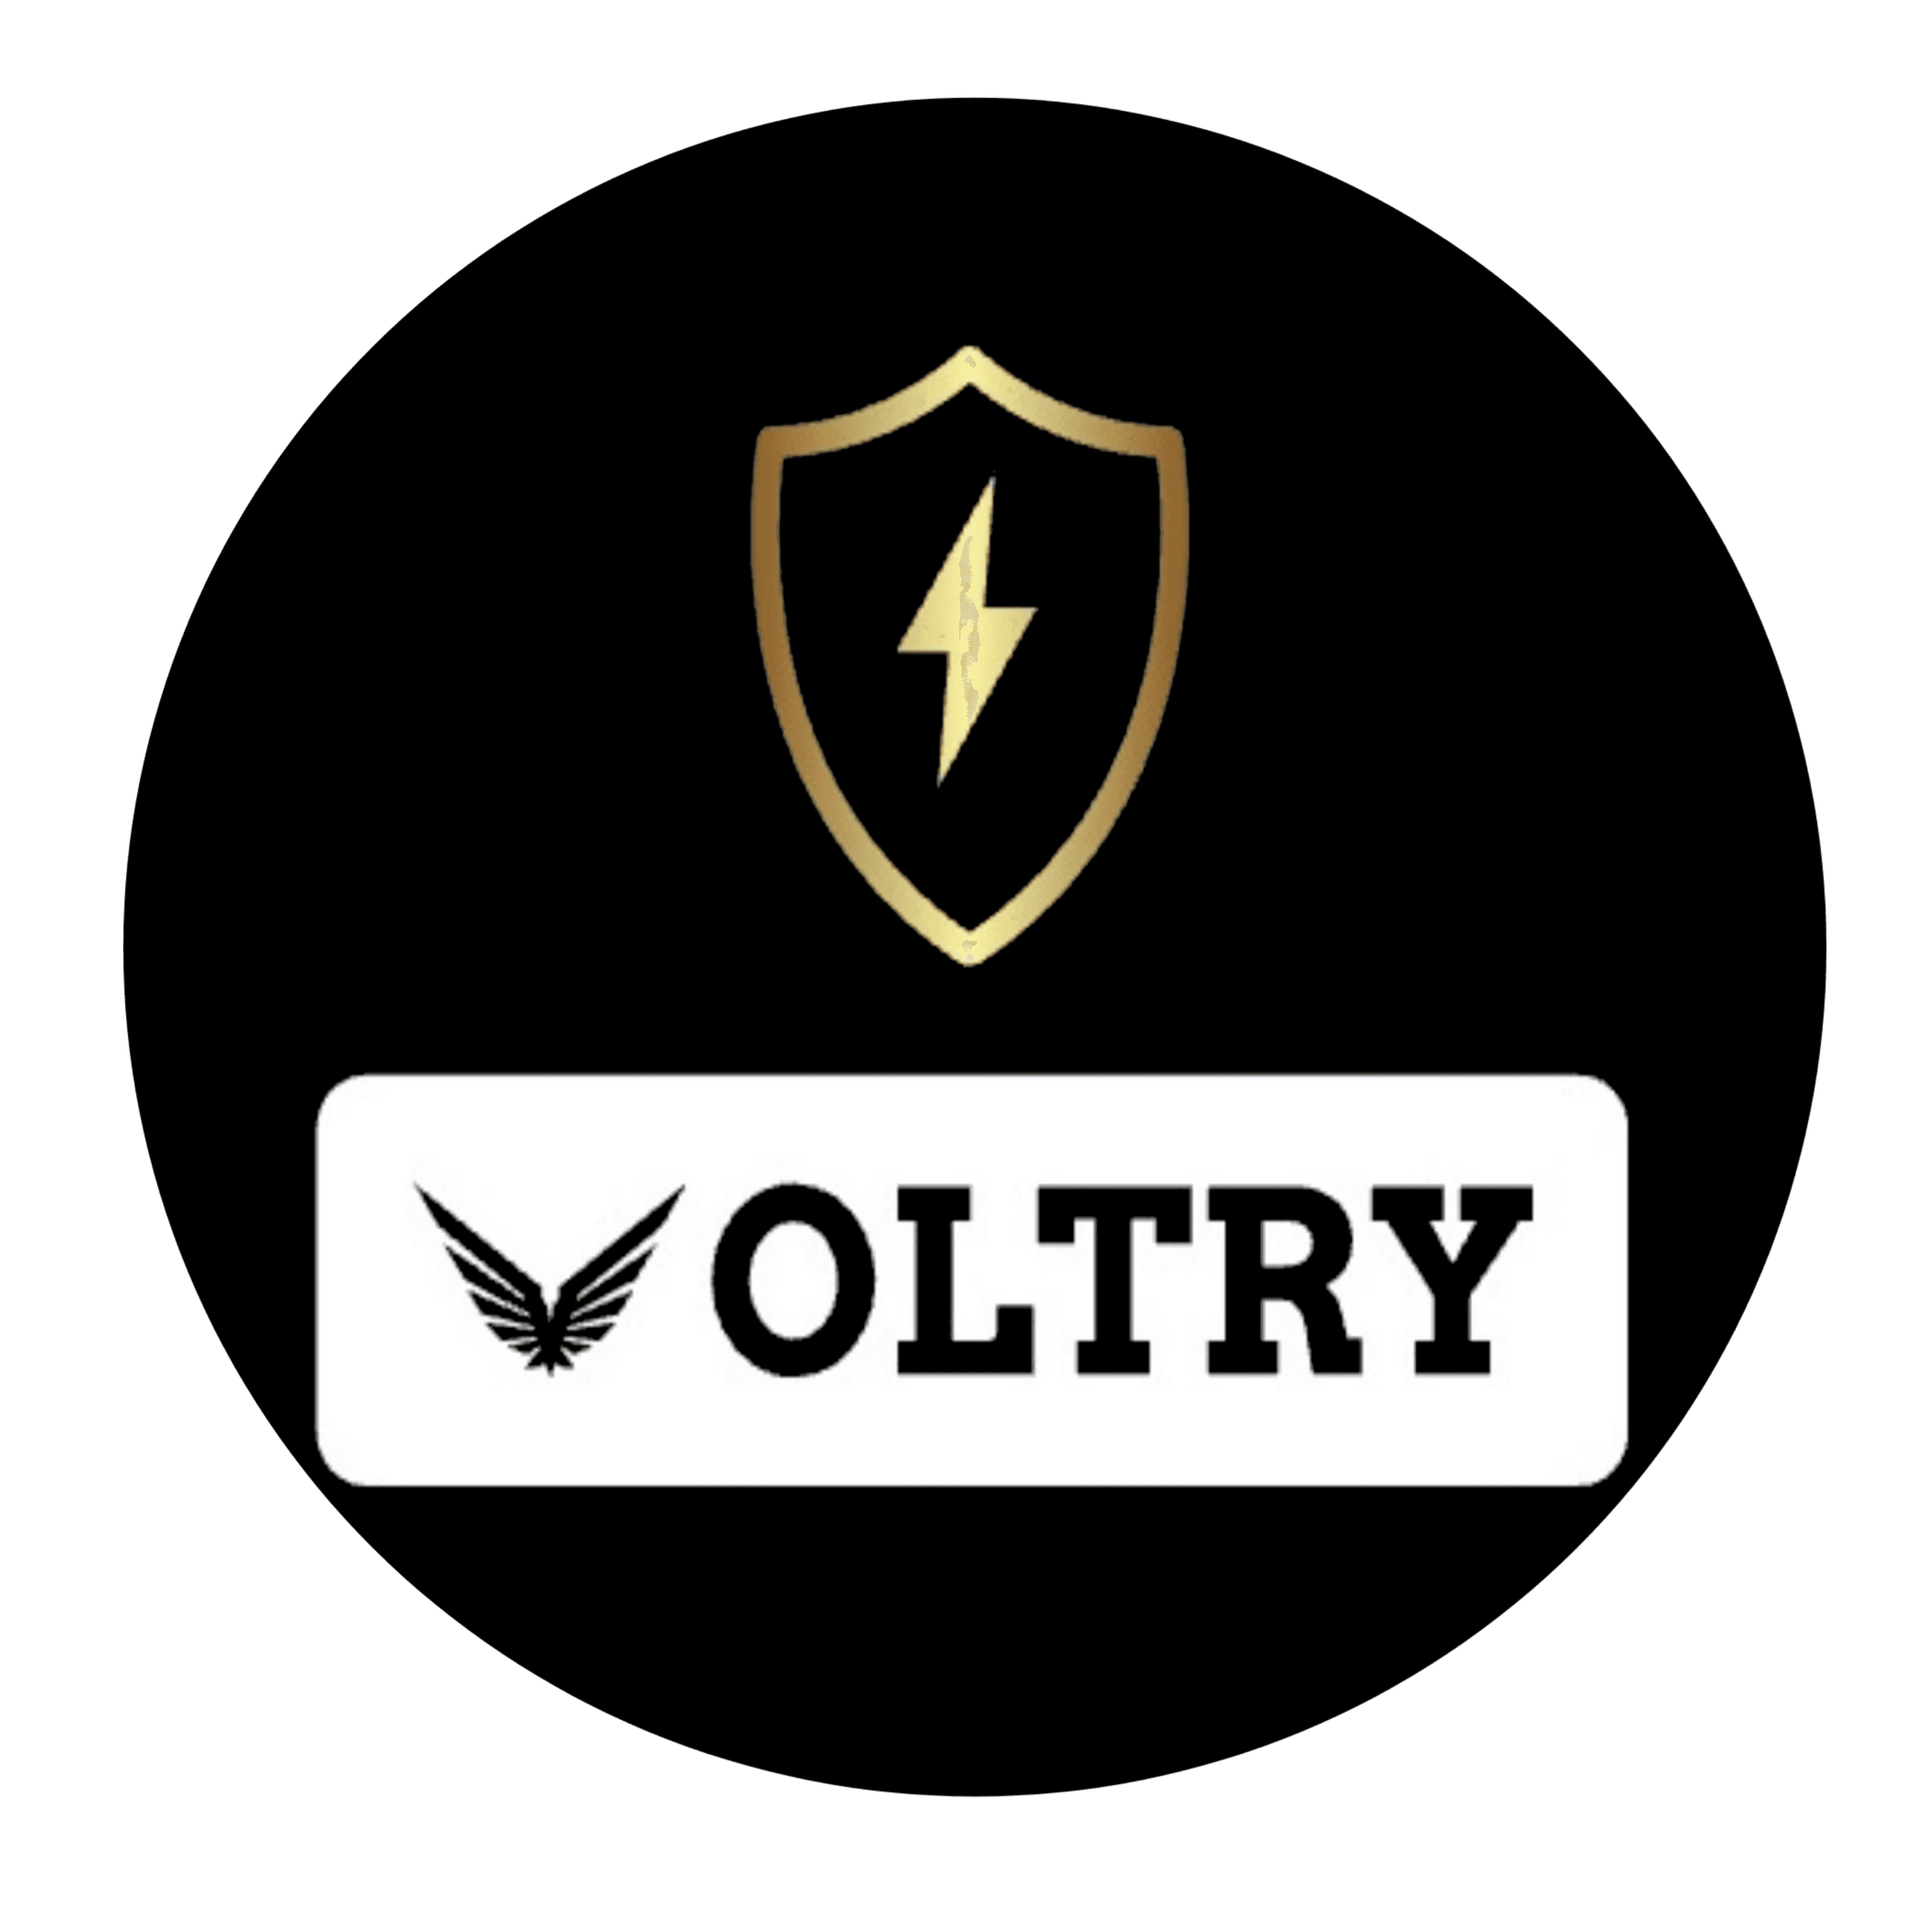 VOLTRY ELECTRICALS